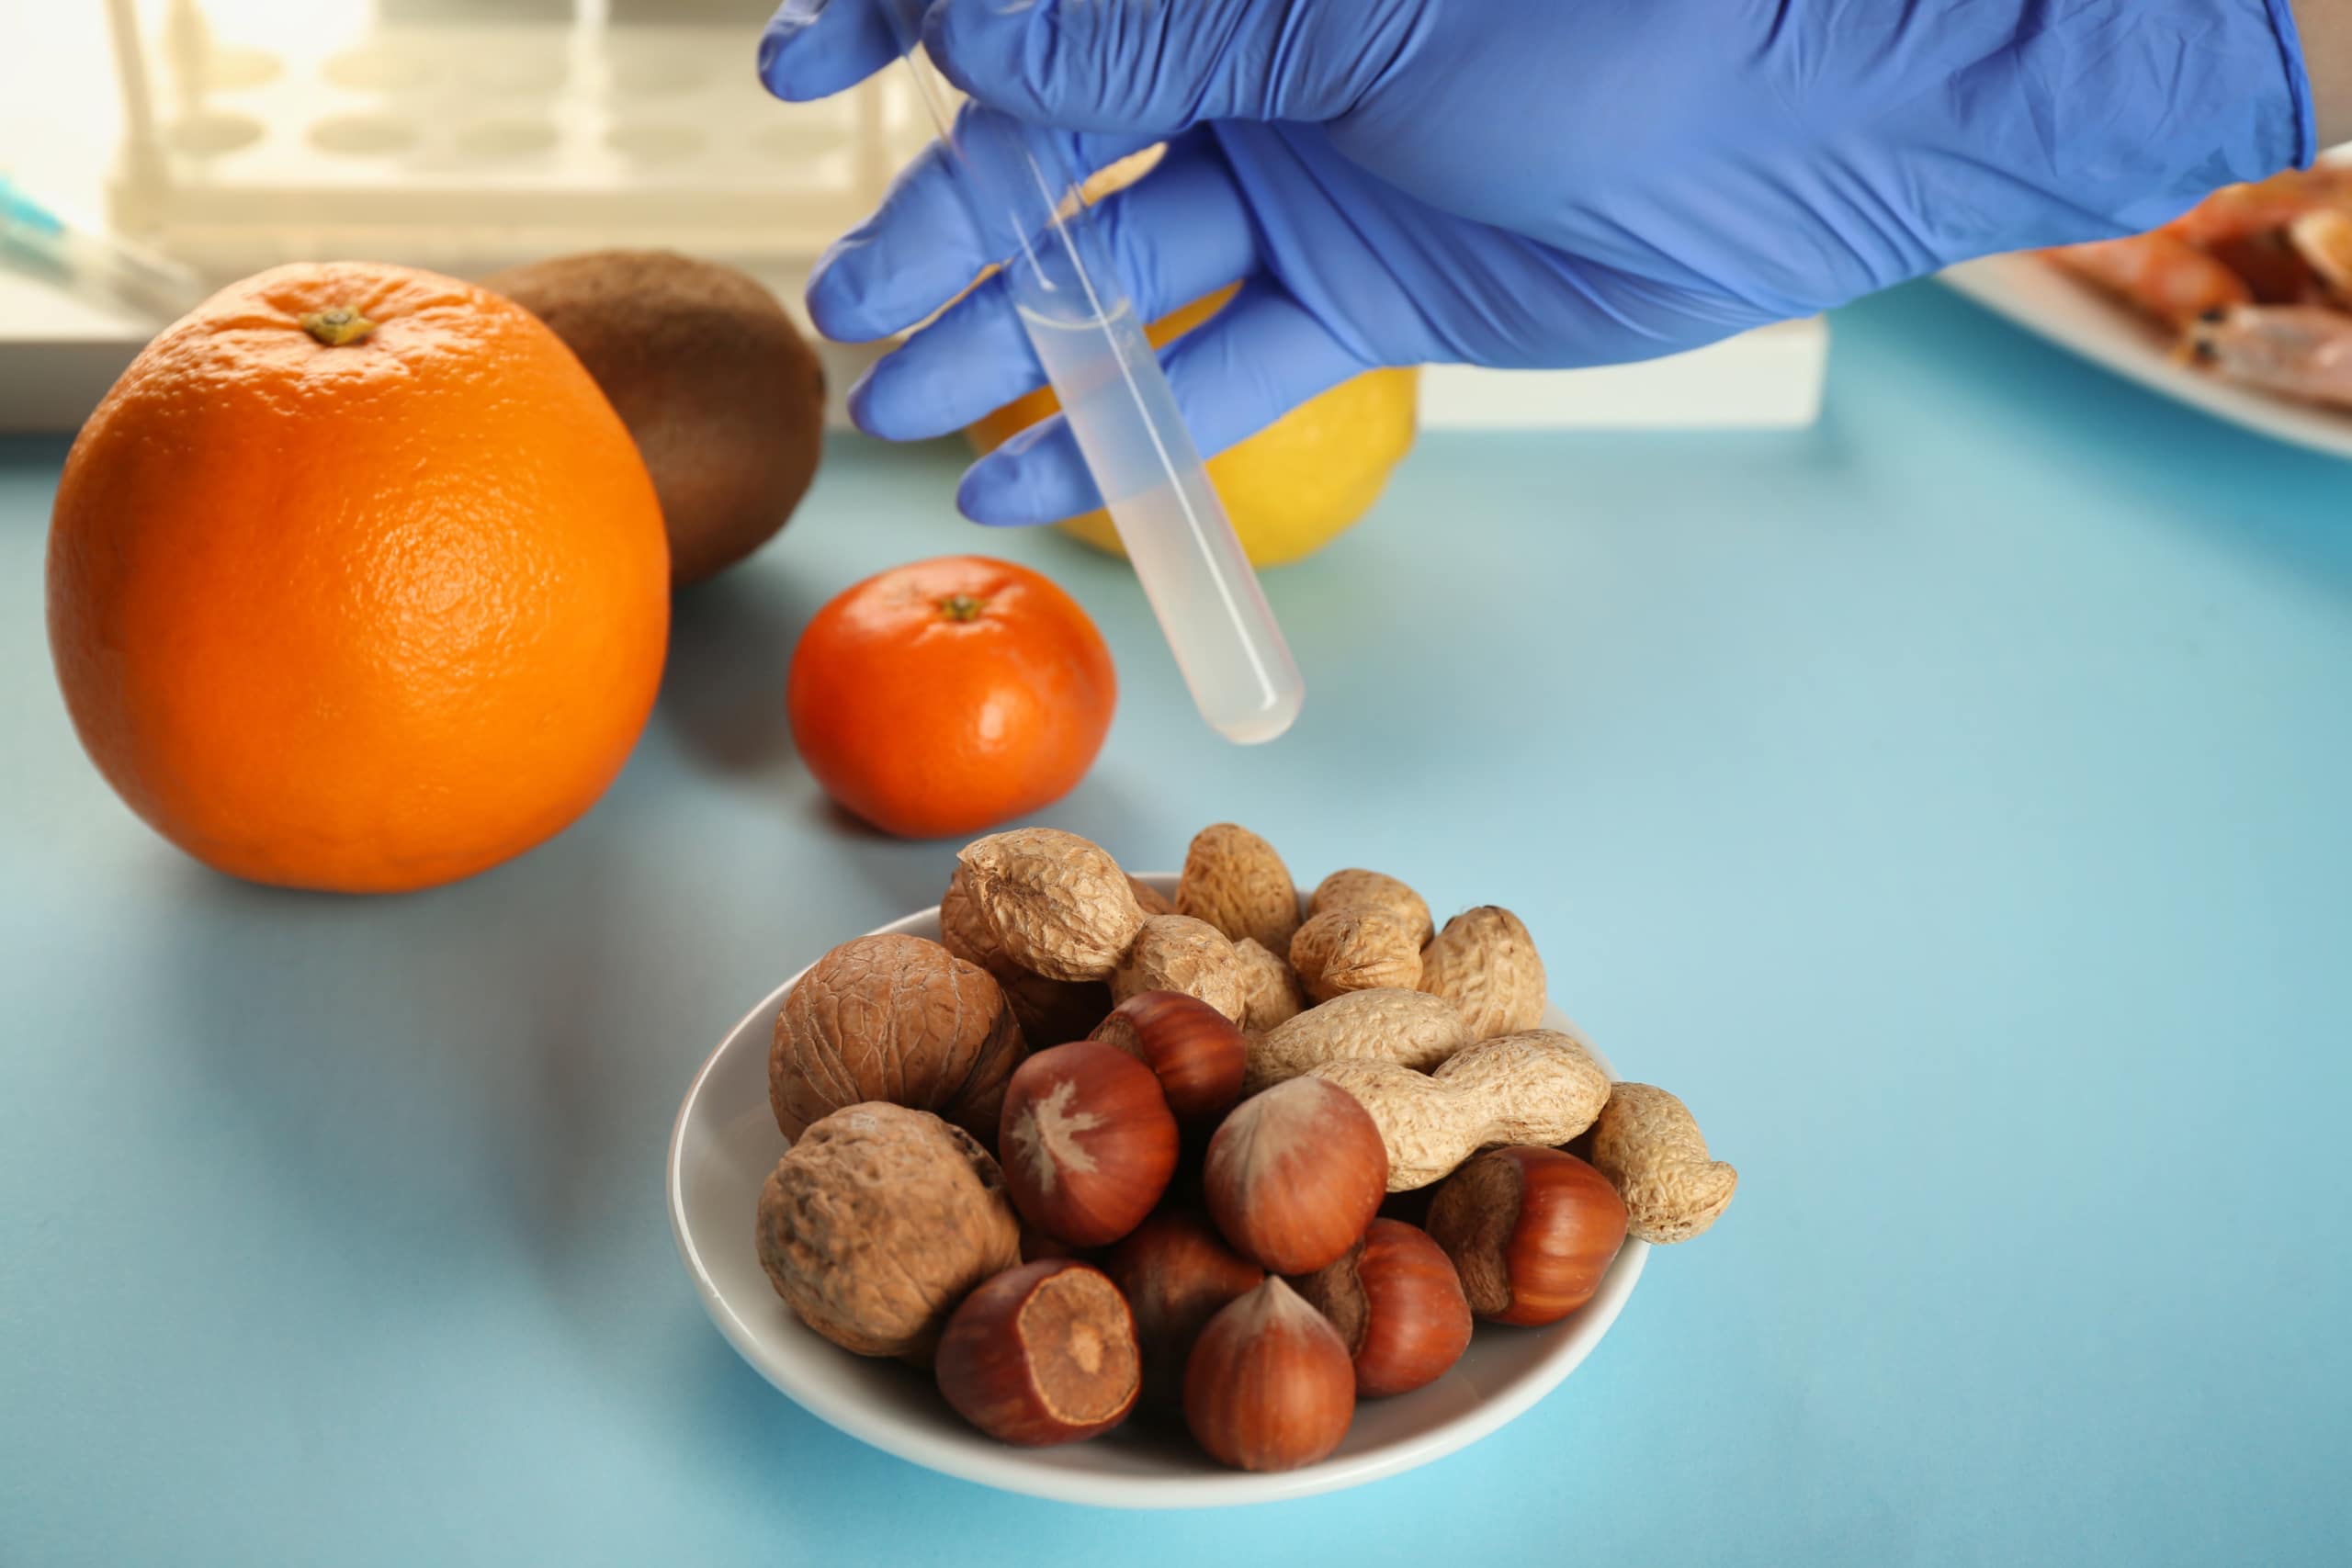 Hand in a blue physician's glove holding a food allergy test tube with a sample over a small bowl of nuts